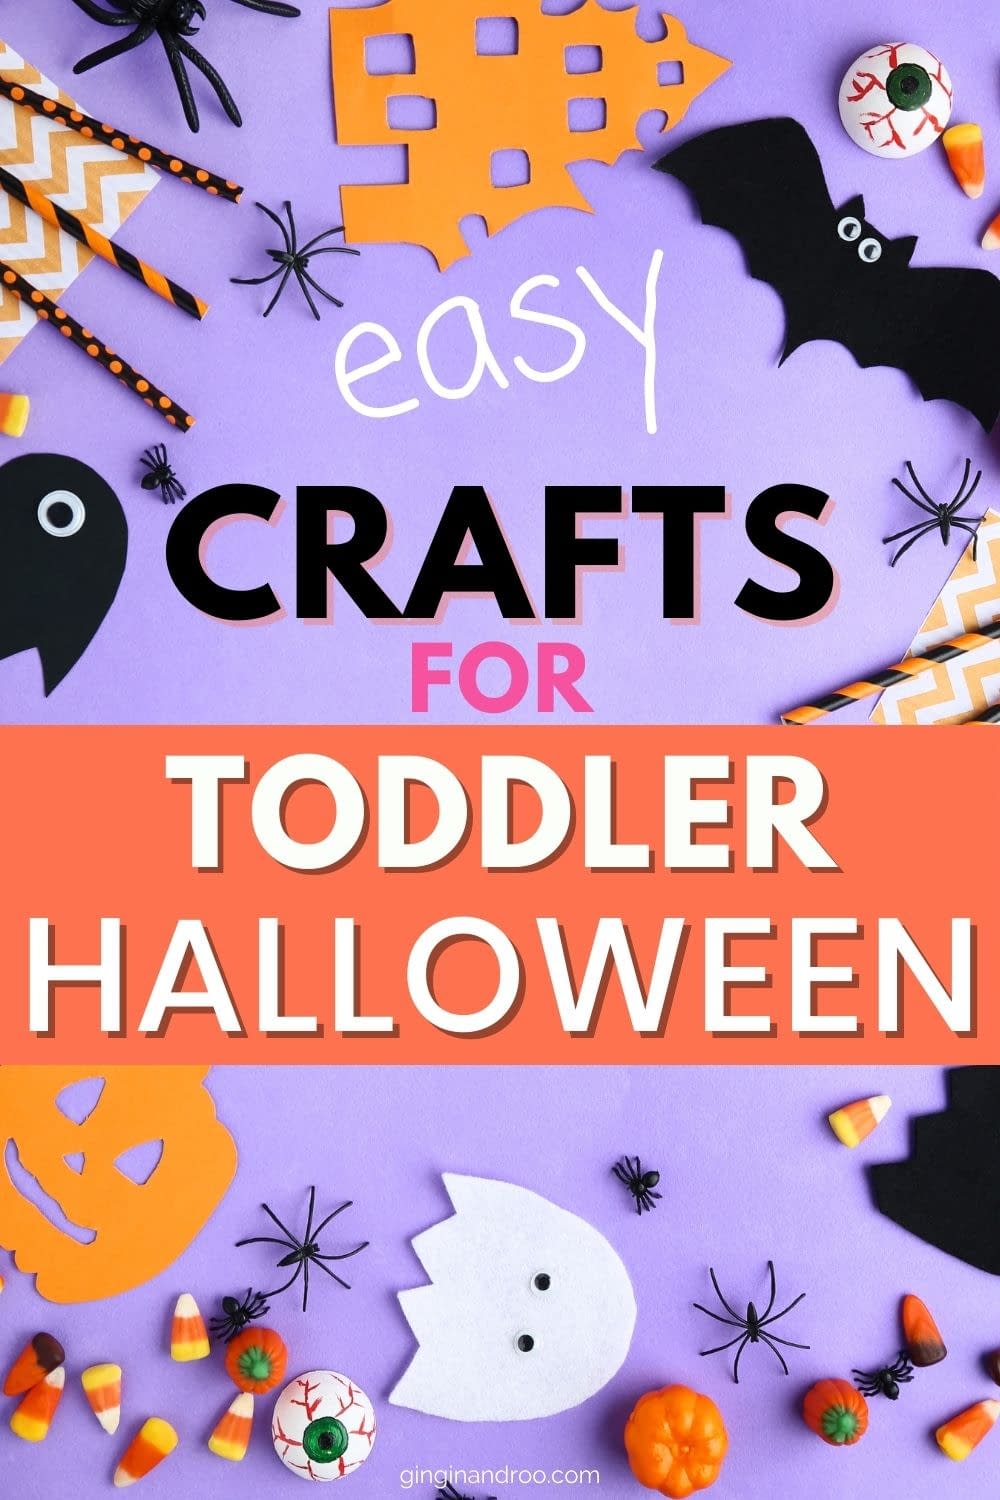 Easy Crafts for Toddler Halloween